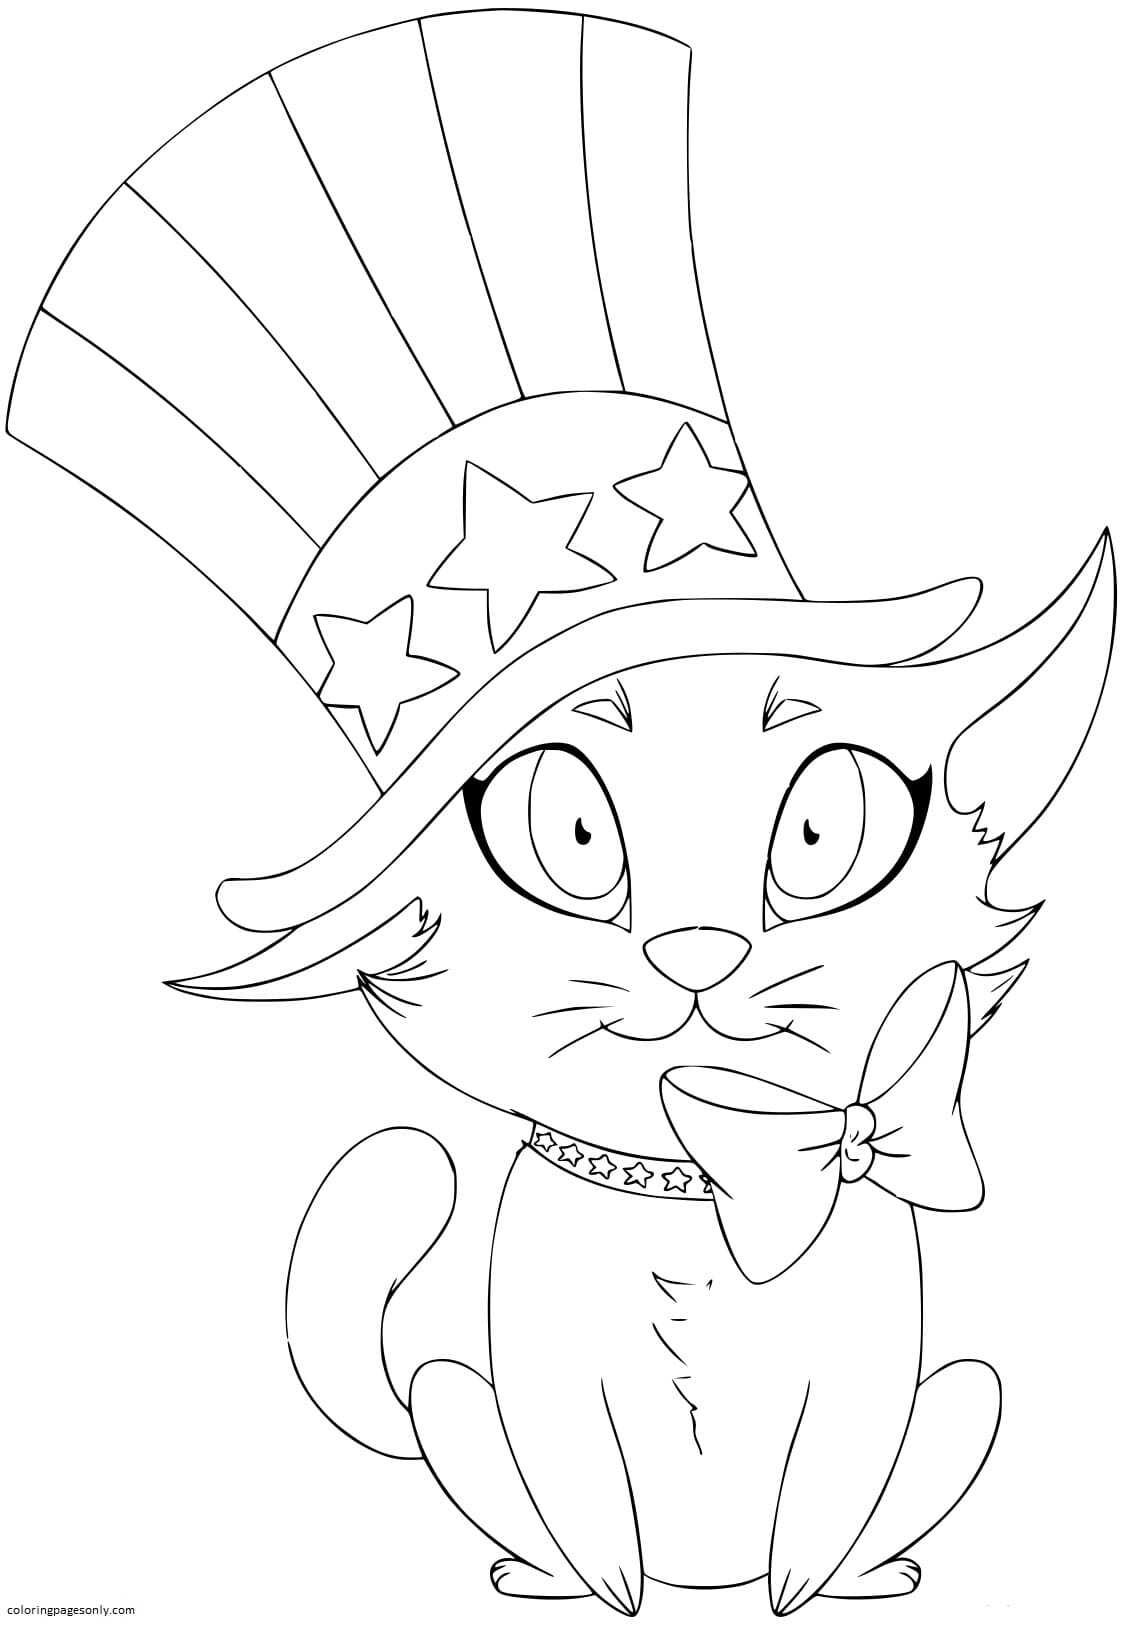 A Kitten Wearing a hat designed as the American Flag Coloring Pages